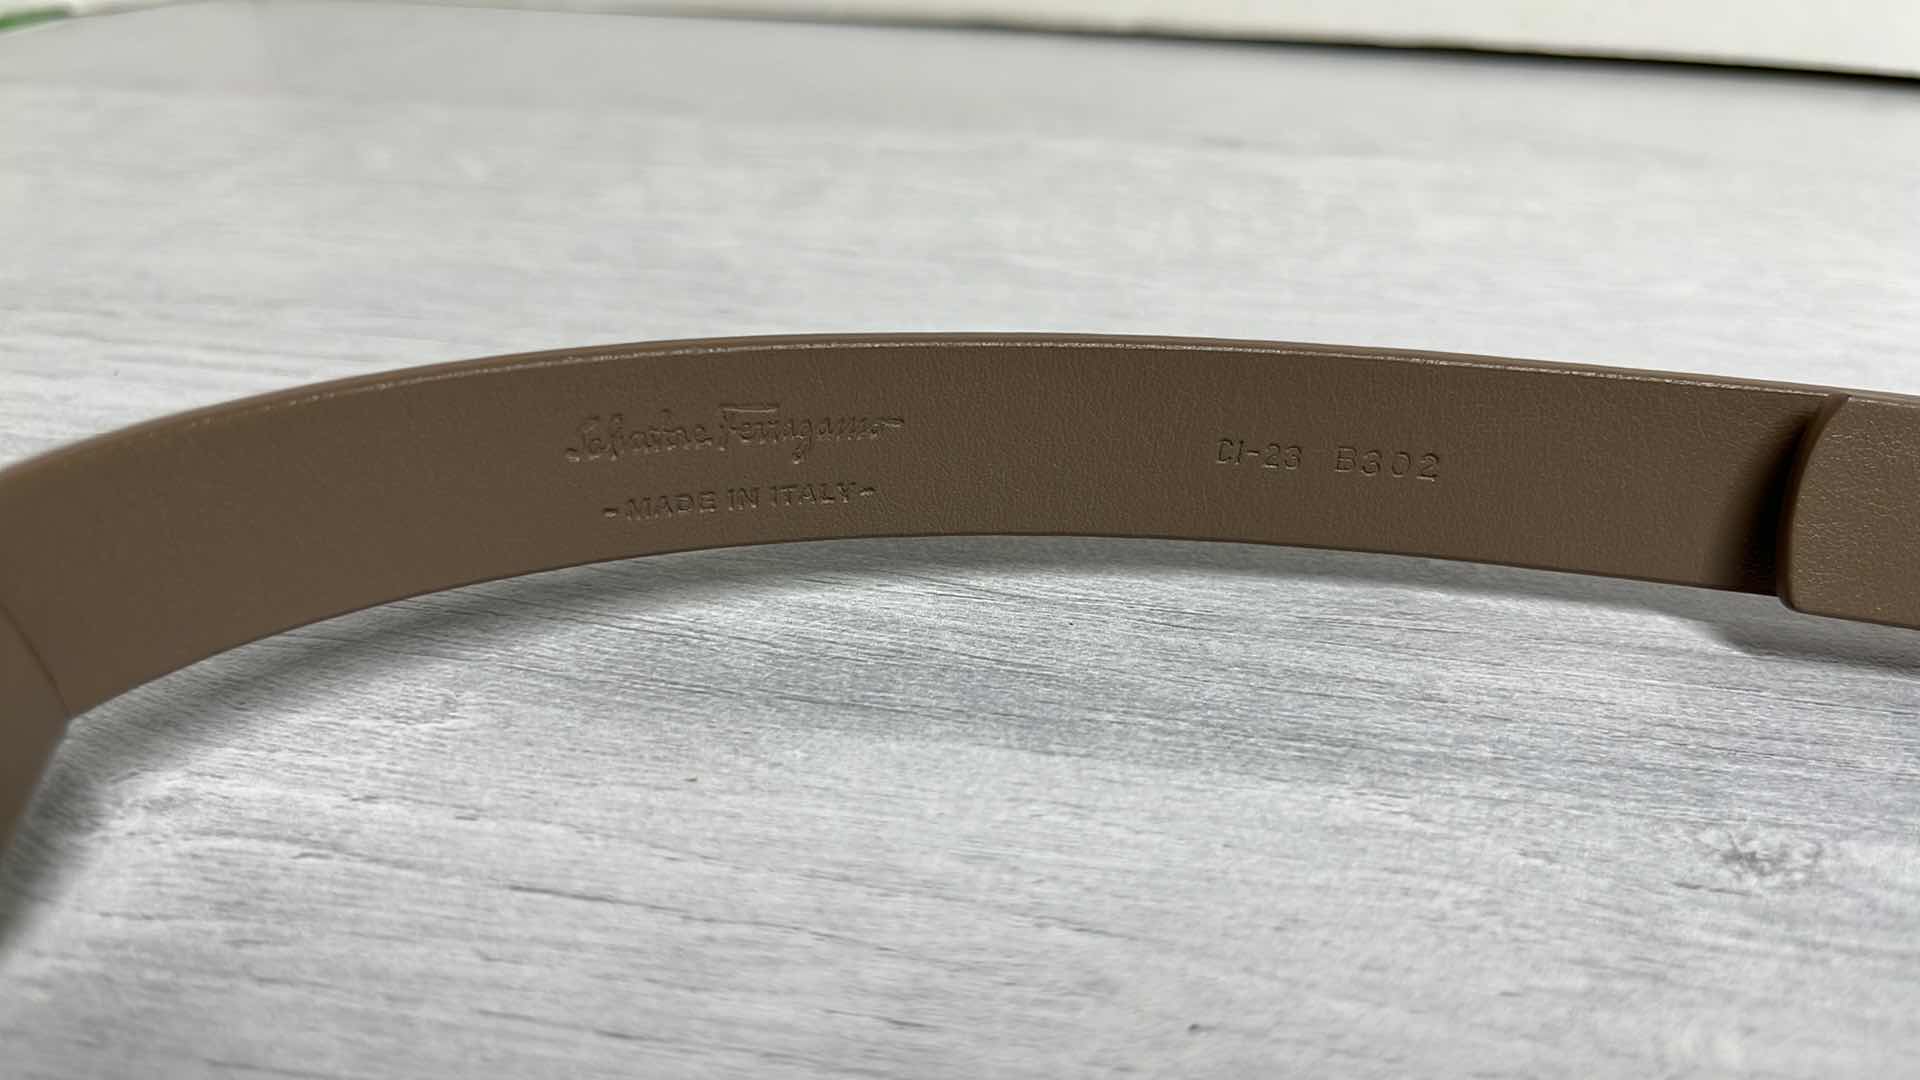 Photo 3 of SALVATORE FERRAGAMO NUTMEG LIGHT BROWN CALF LEATHER BELT, MADE IN ITALY SIZE 75CM (29.5”)